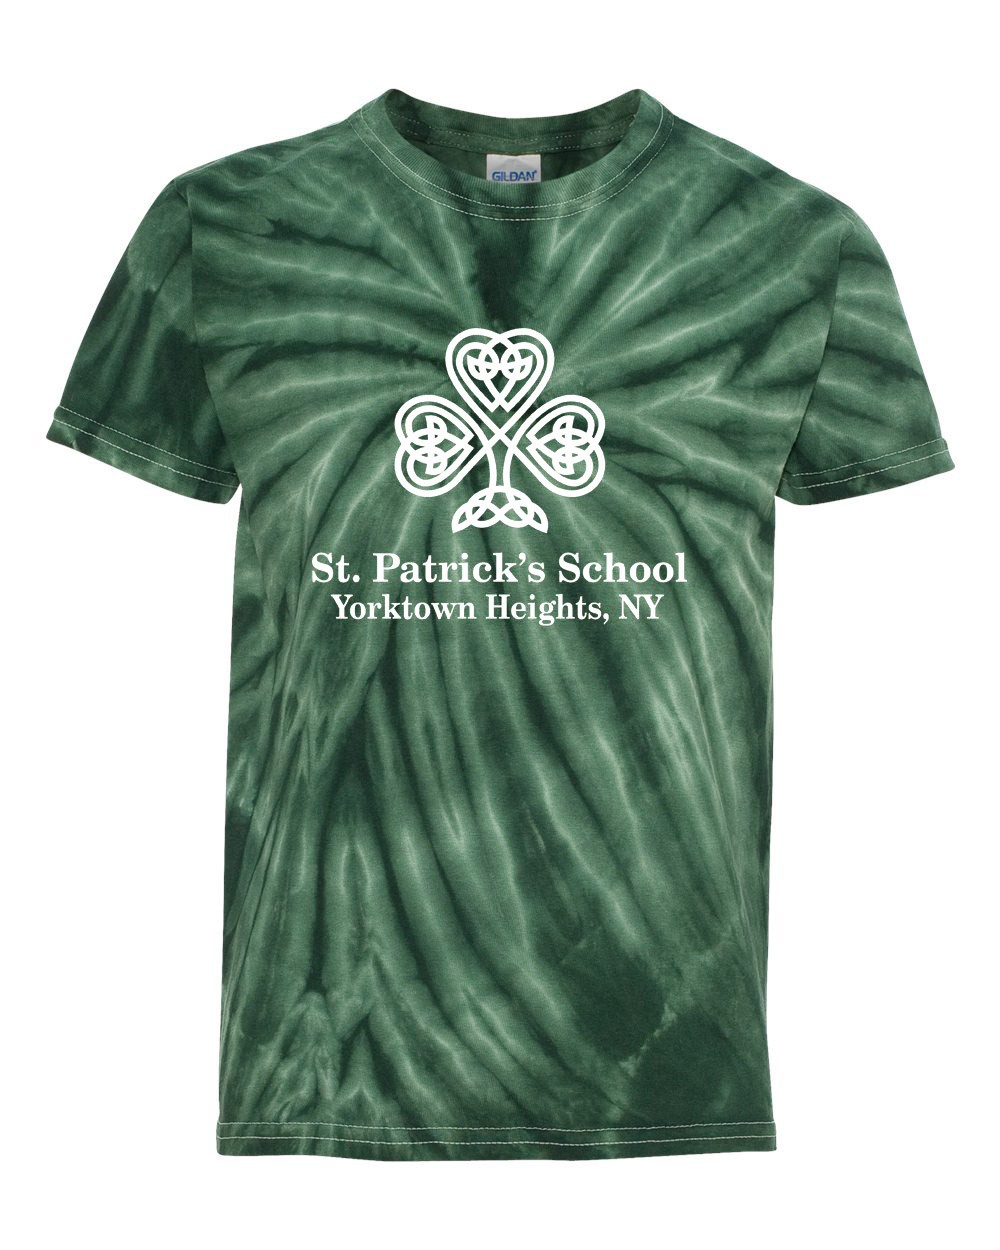 SPS Spirit S/S Tie Dye T-Shirt w/ White Logo - Please Allow 2-3 Weeks for Delivery